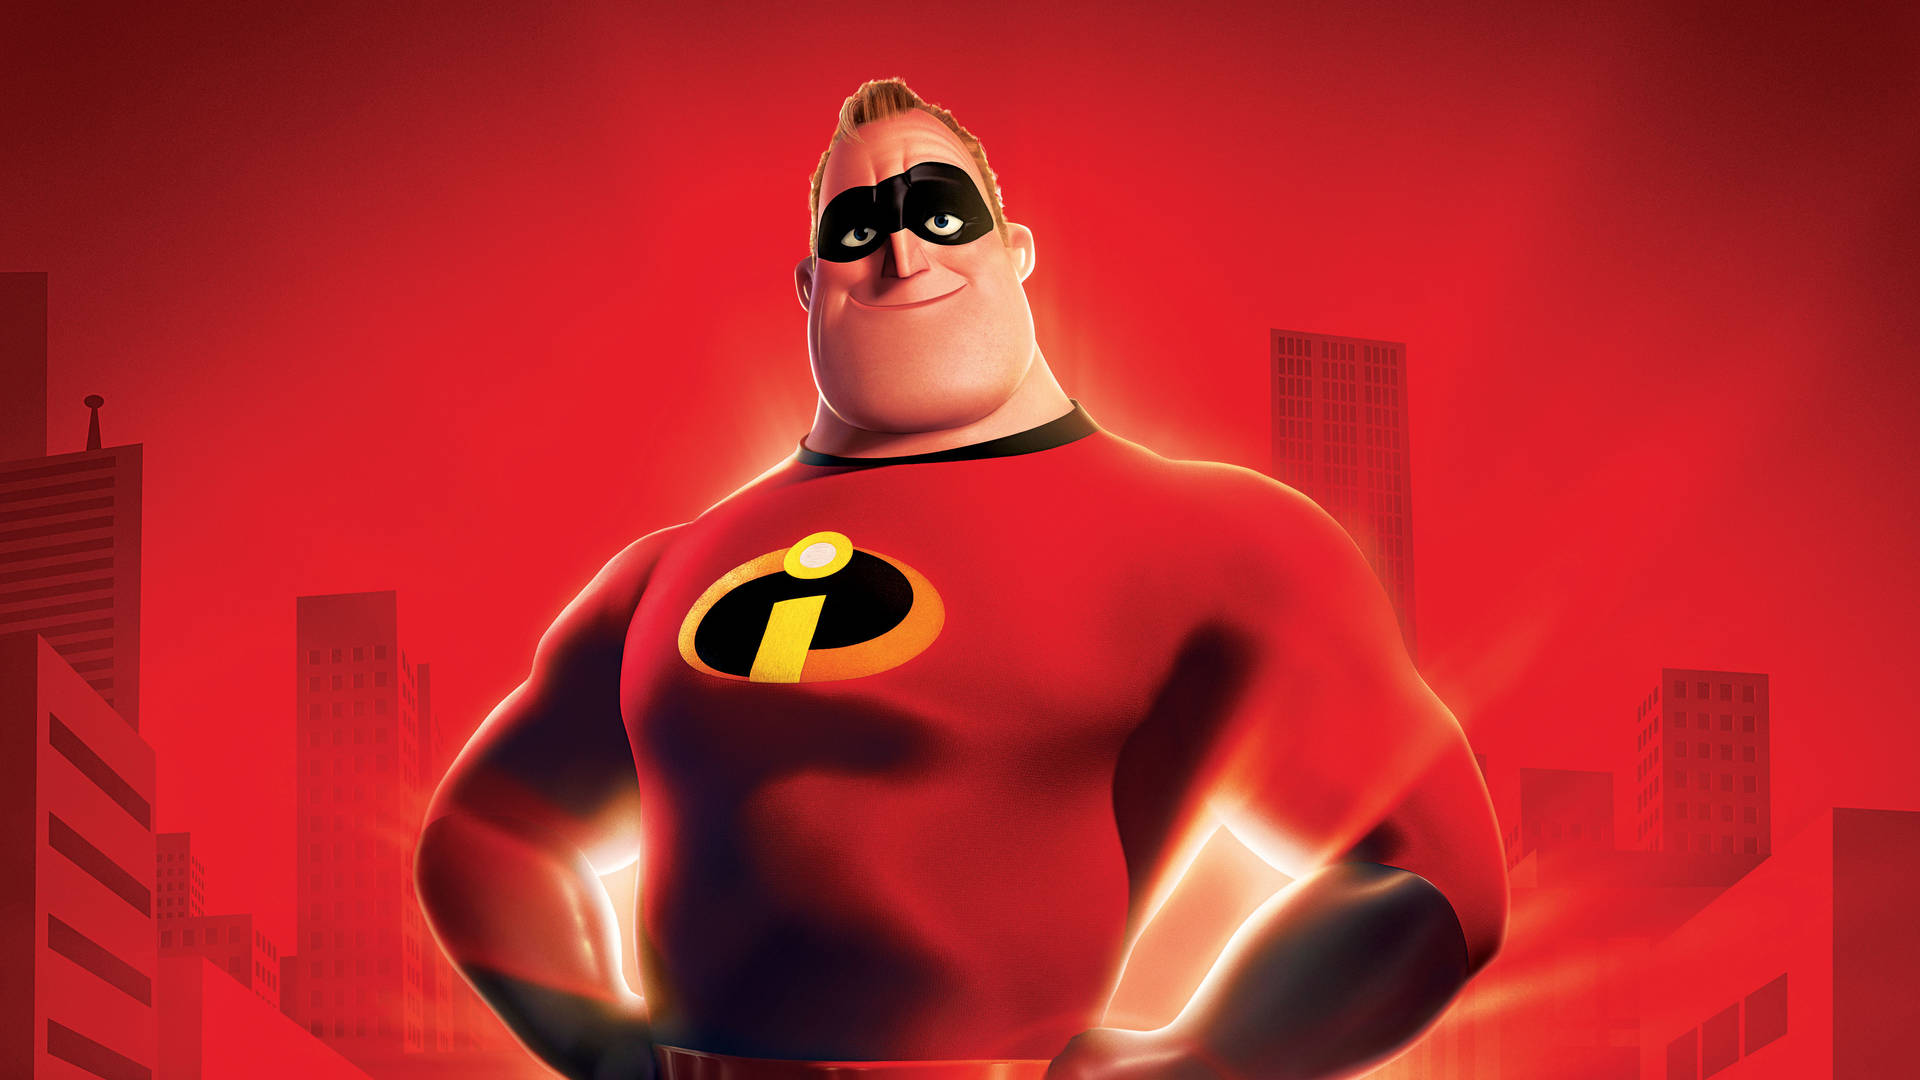 Official Mr. Incredible Poster